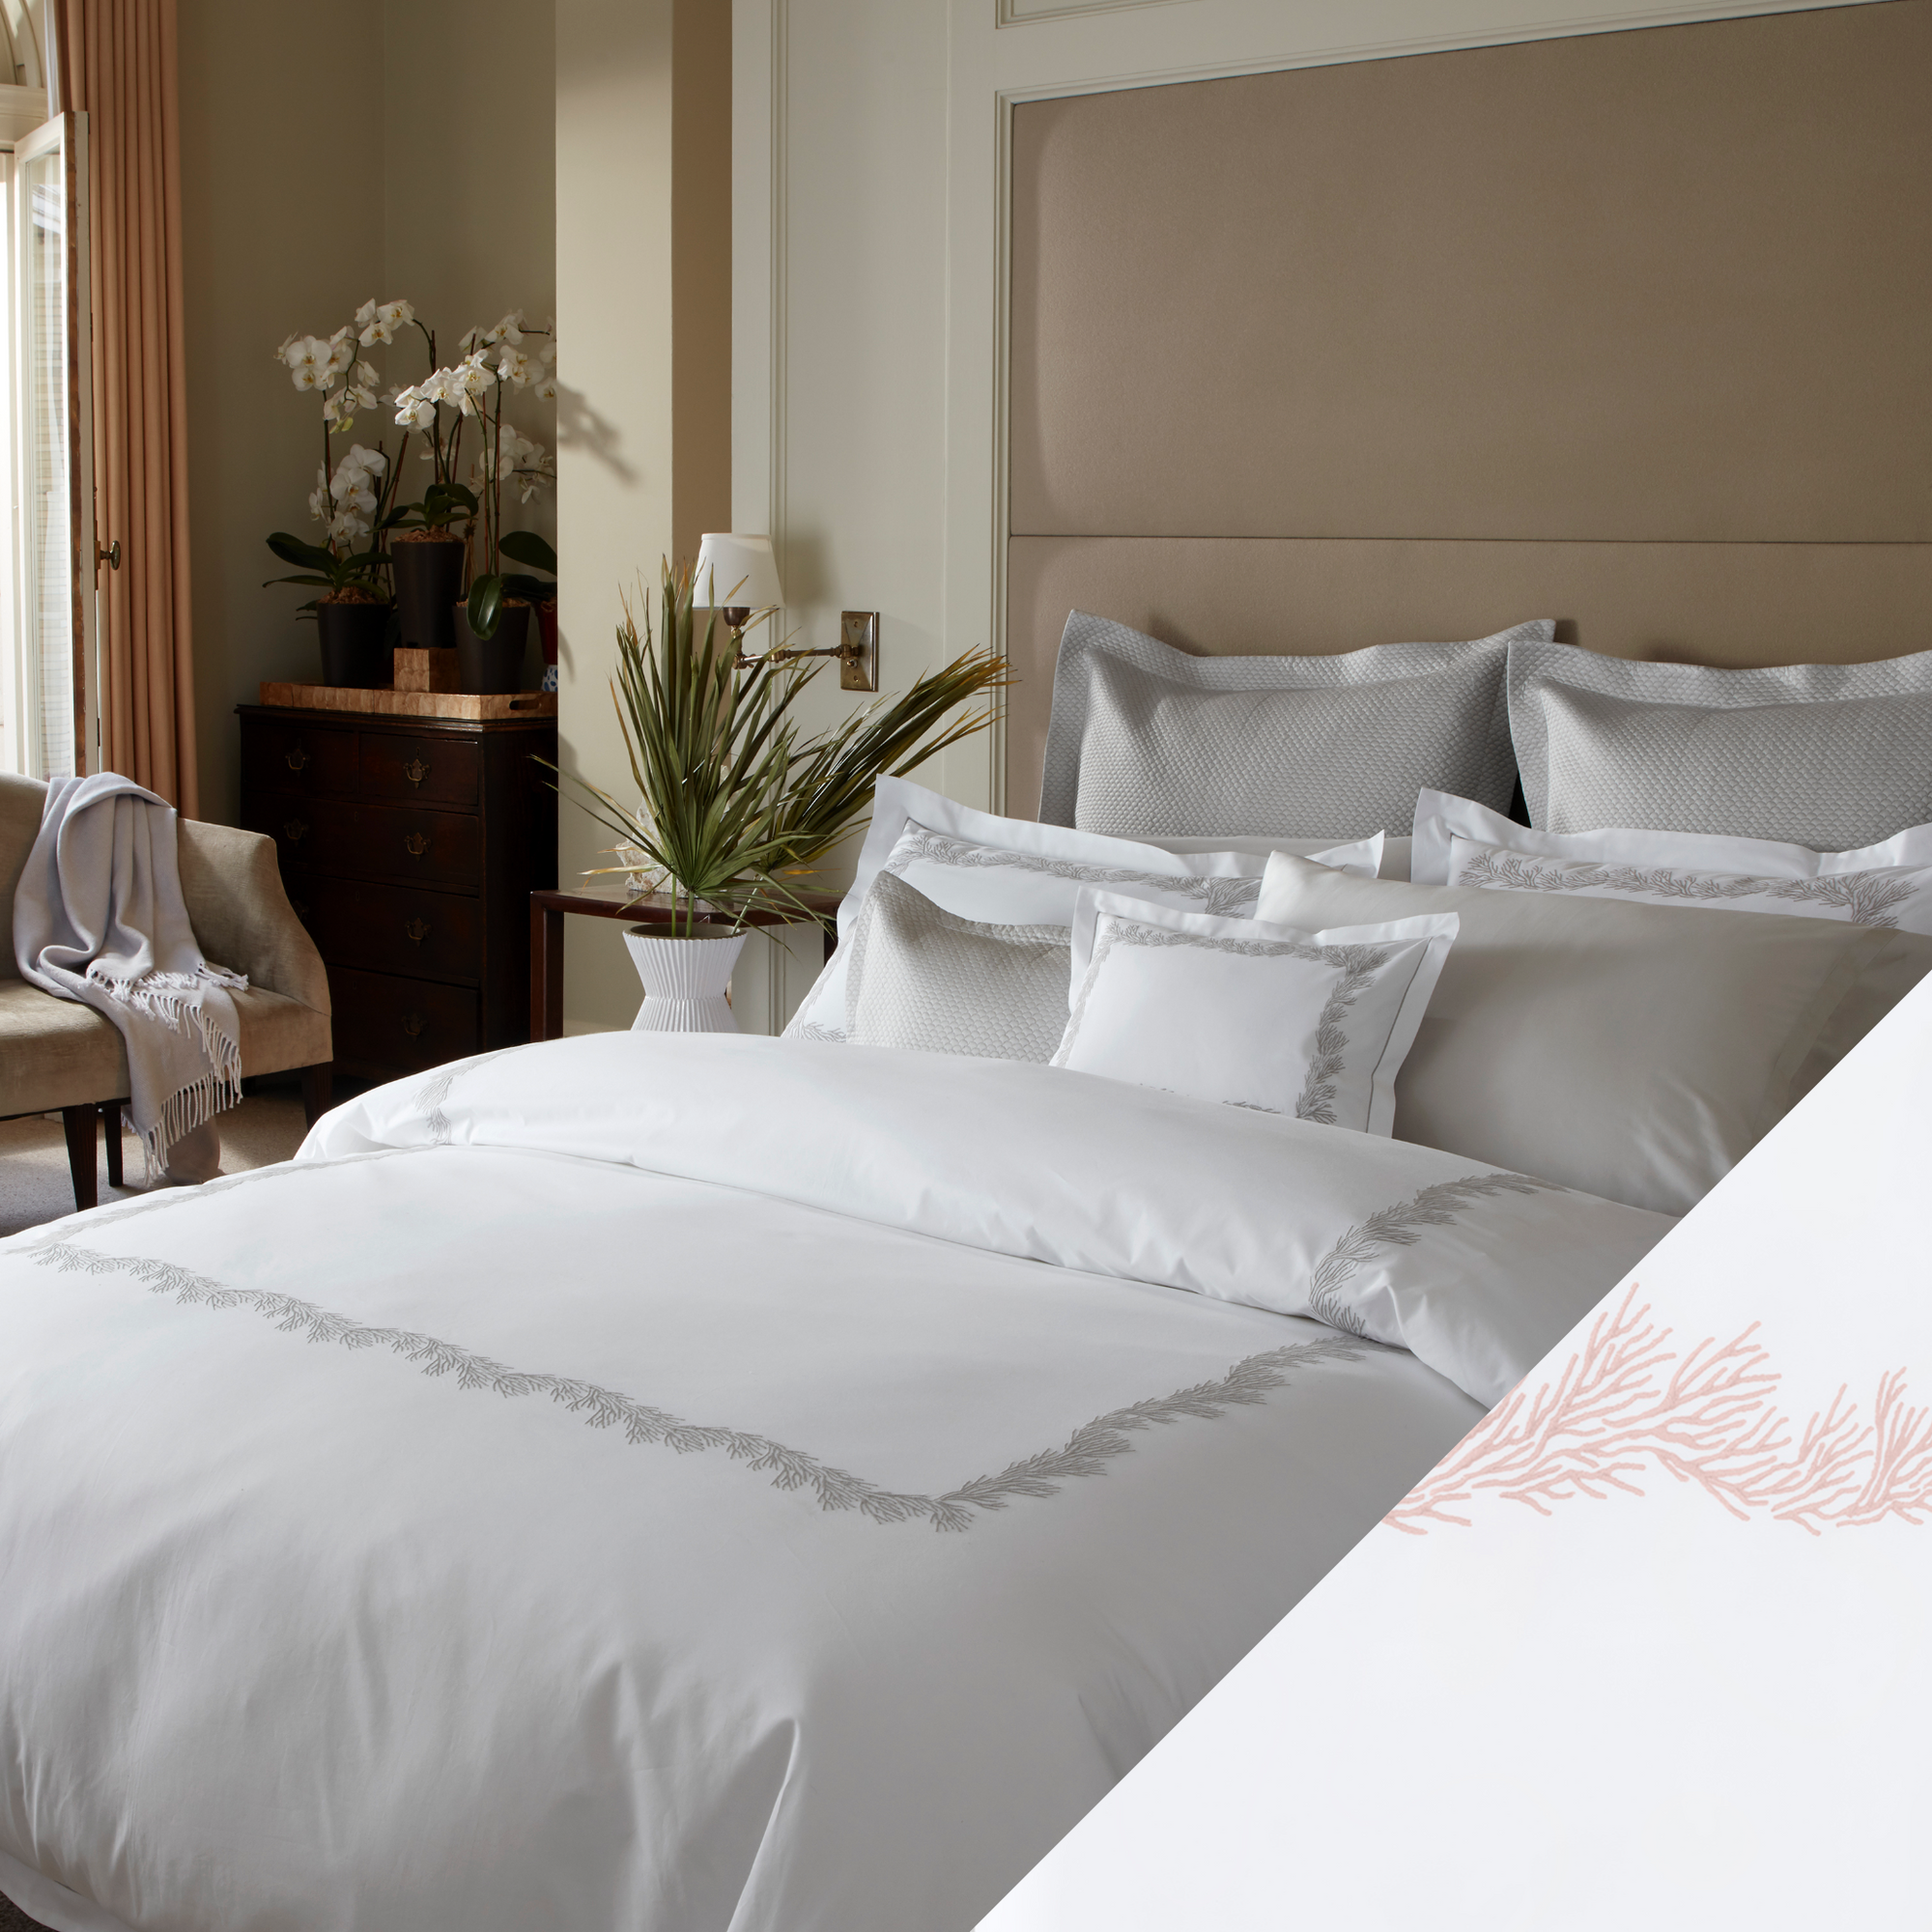 Full Lifestyle Image of Matouk Atoll Bedding Collection with Swatch of Blush